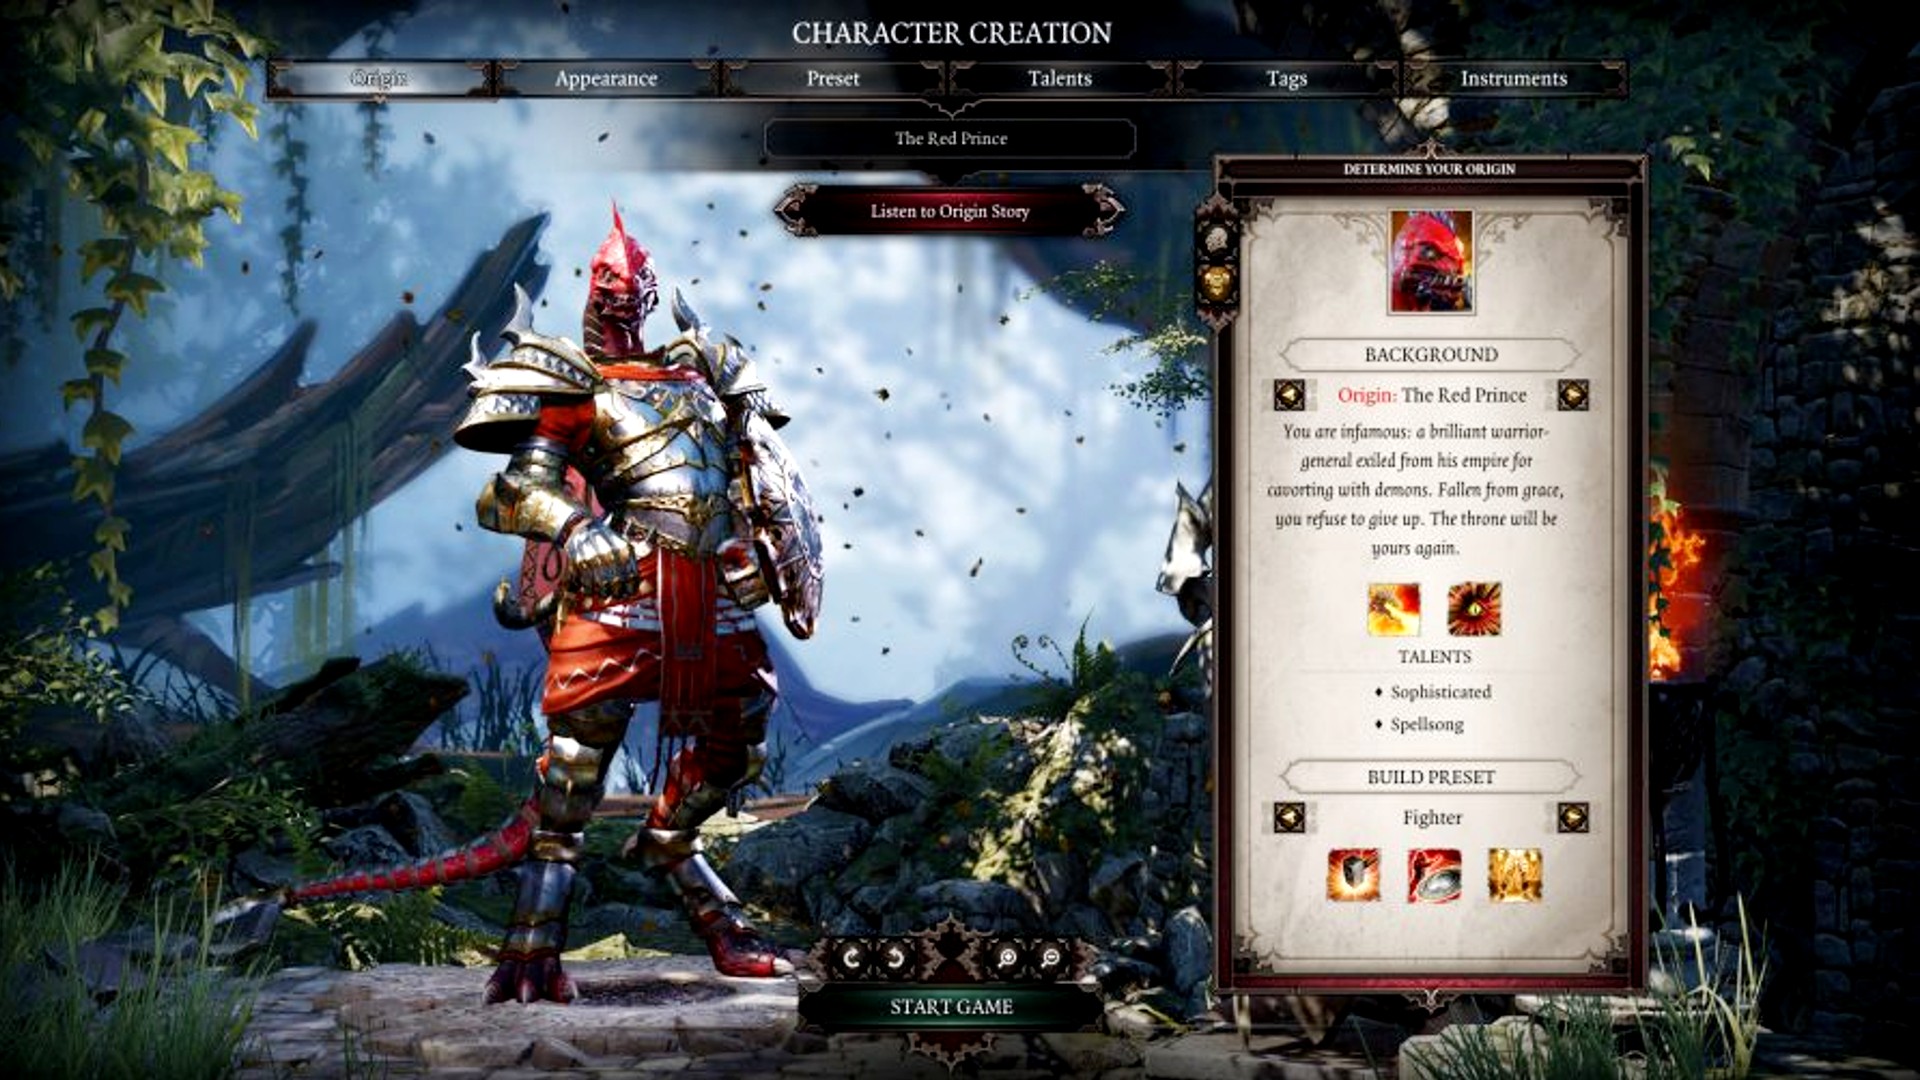 Best RPG games: Divinity 2. Image shows the powerful character creator in the game.